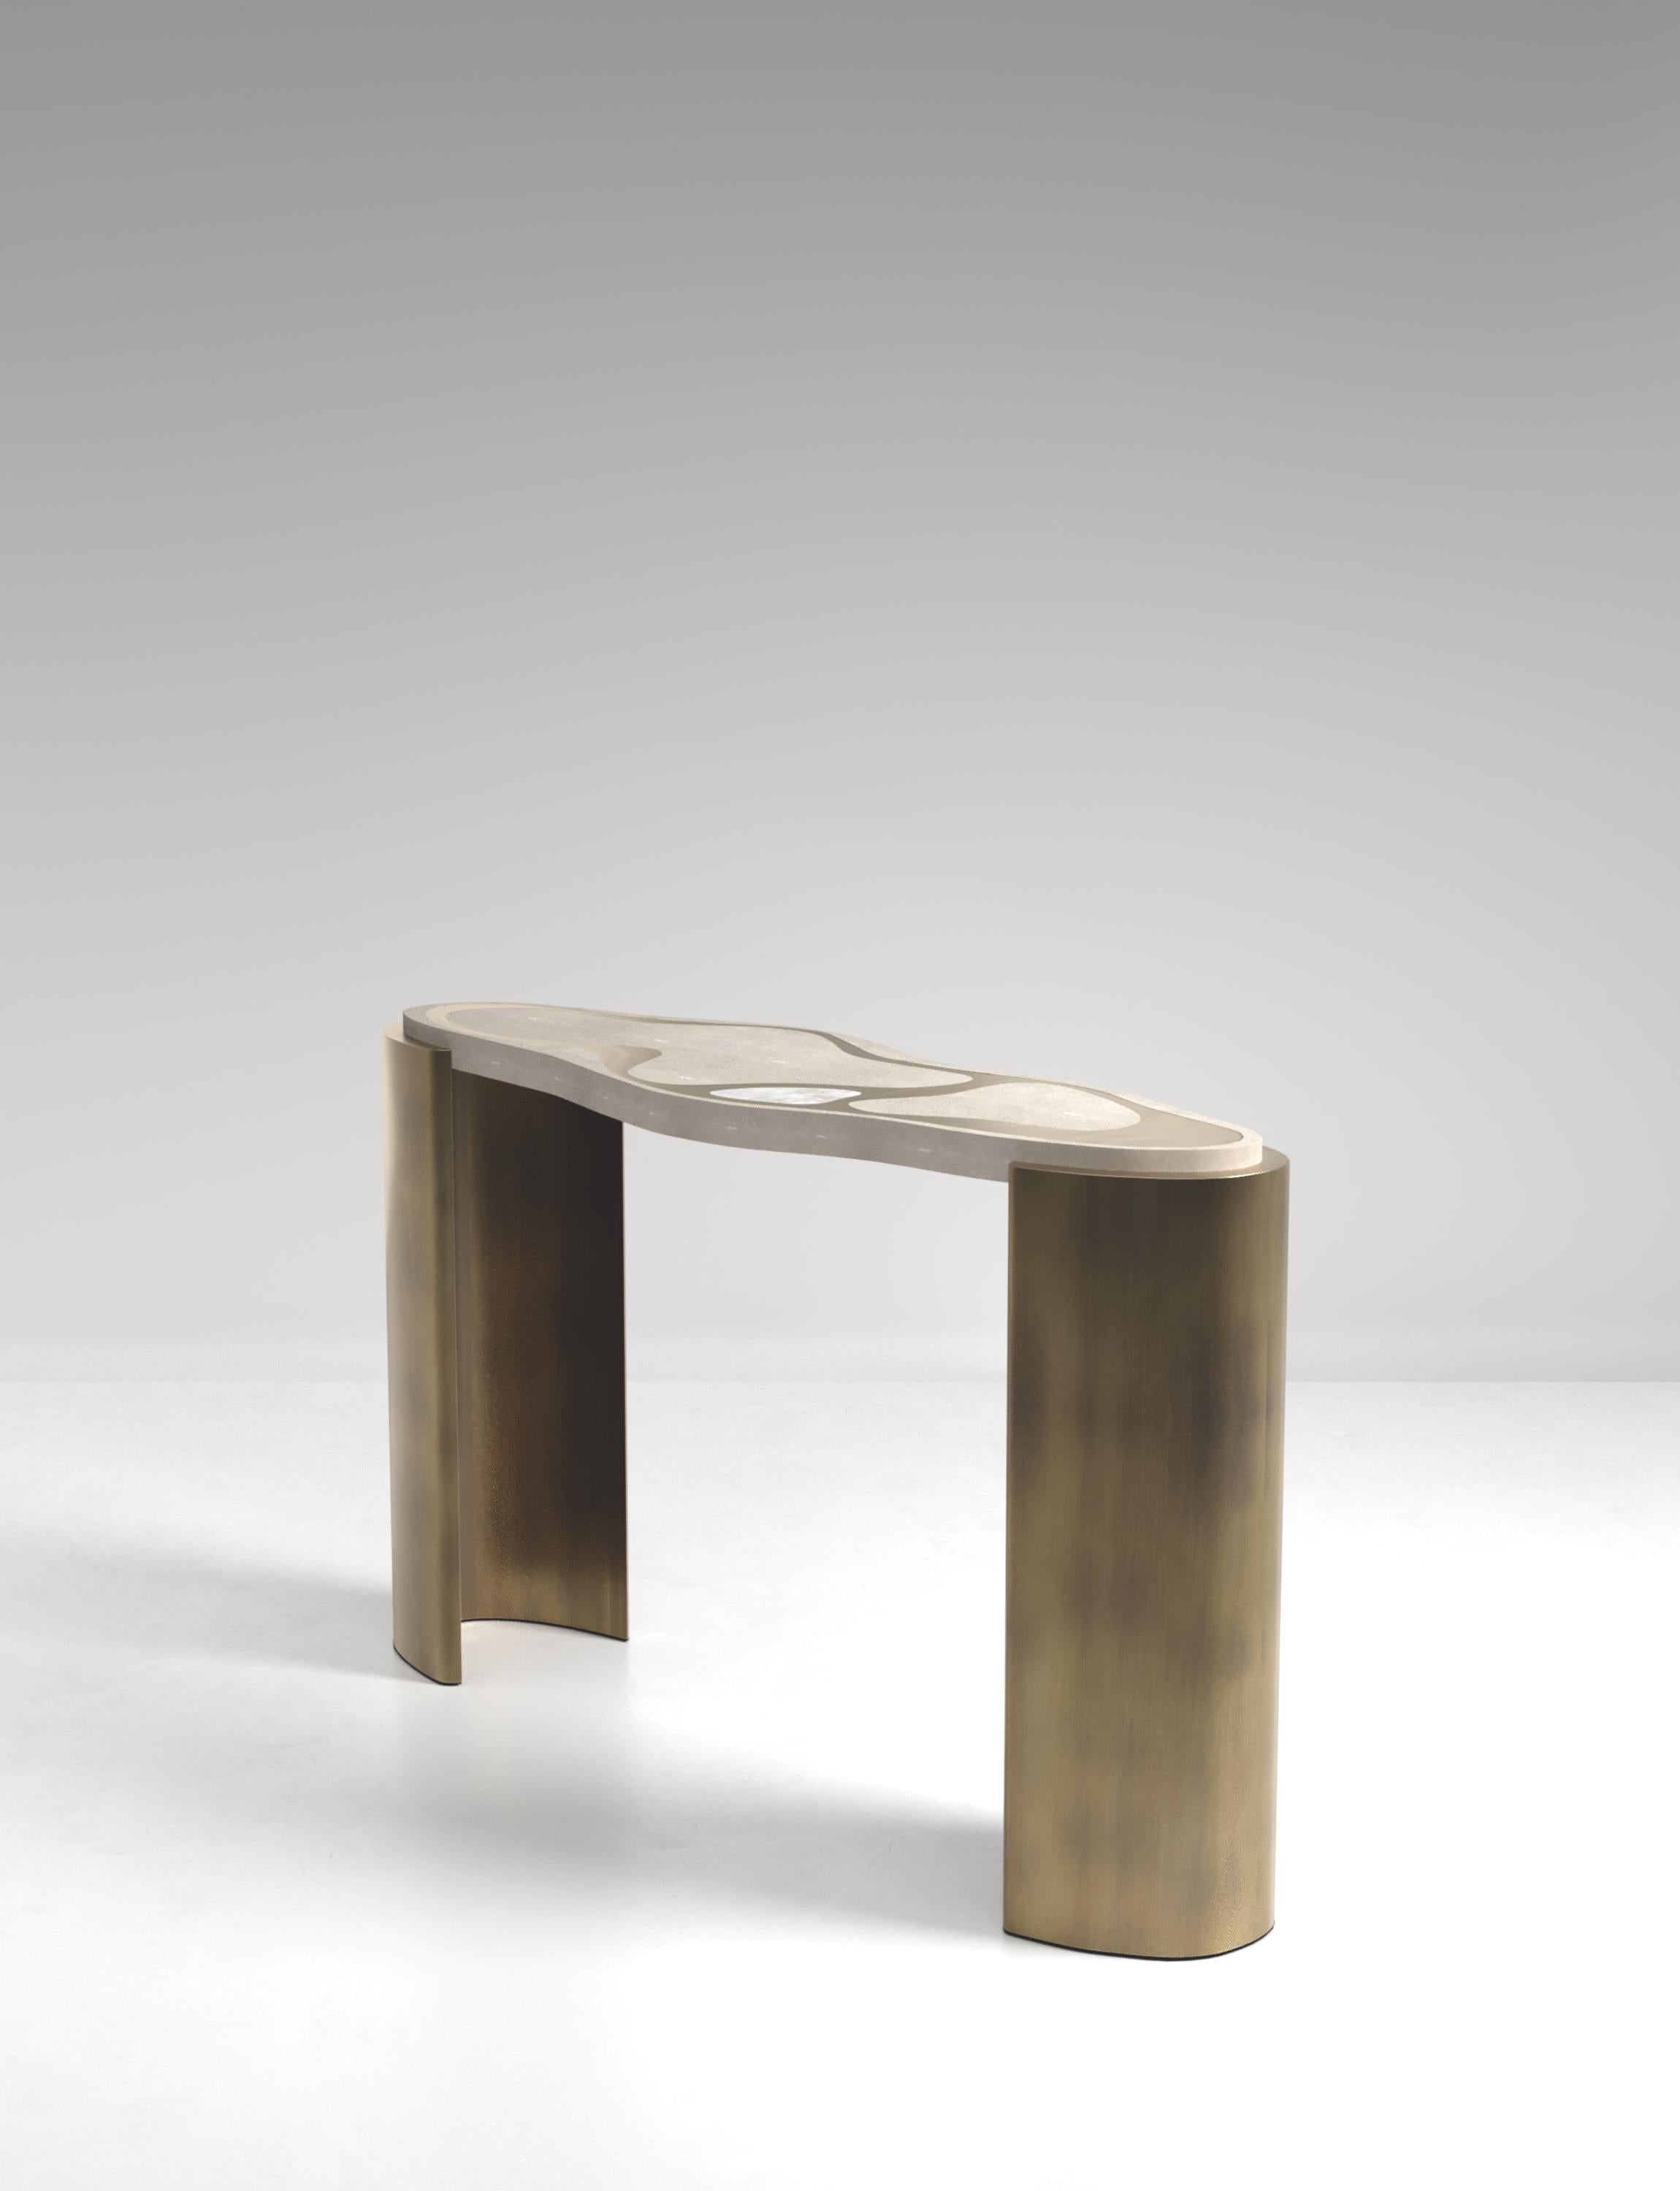 The Mask Console Table by Kifu Paris is a versatile and organic piece. The amorphous top and base are inlaid in a mixture of cream shagreen, white quartz and bronze-patina brass. This piece is designed by Kifu Augousti the daughter of Ria and Yiouri